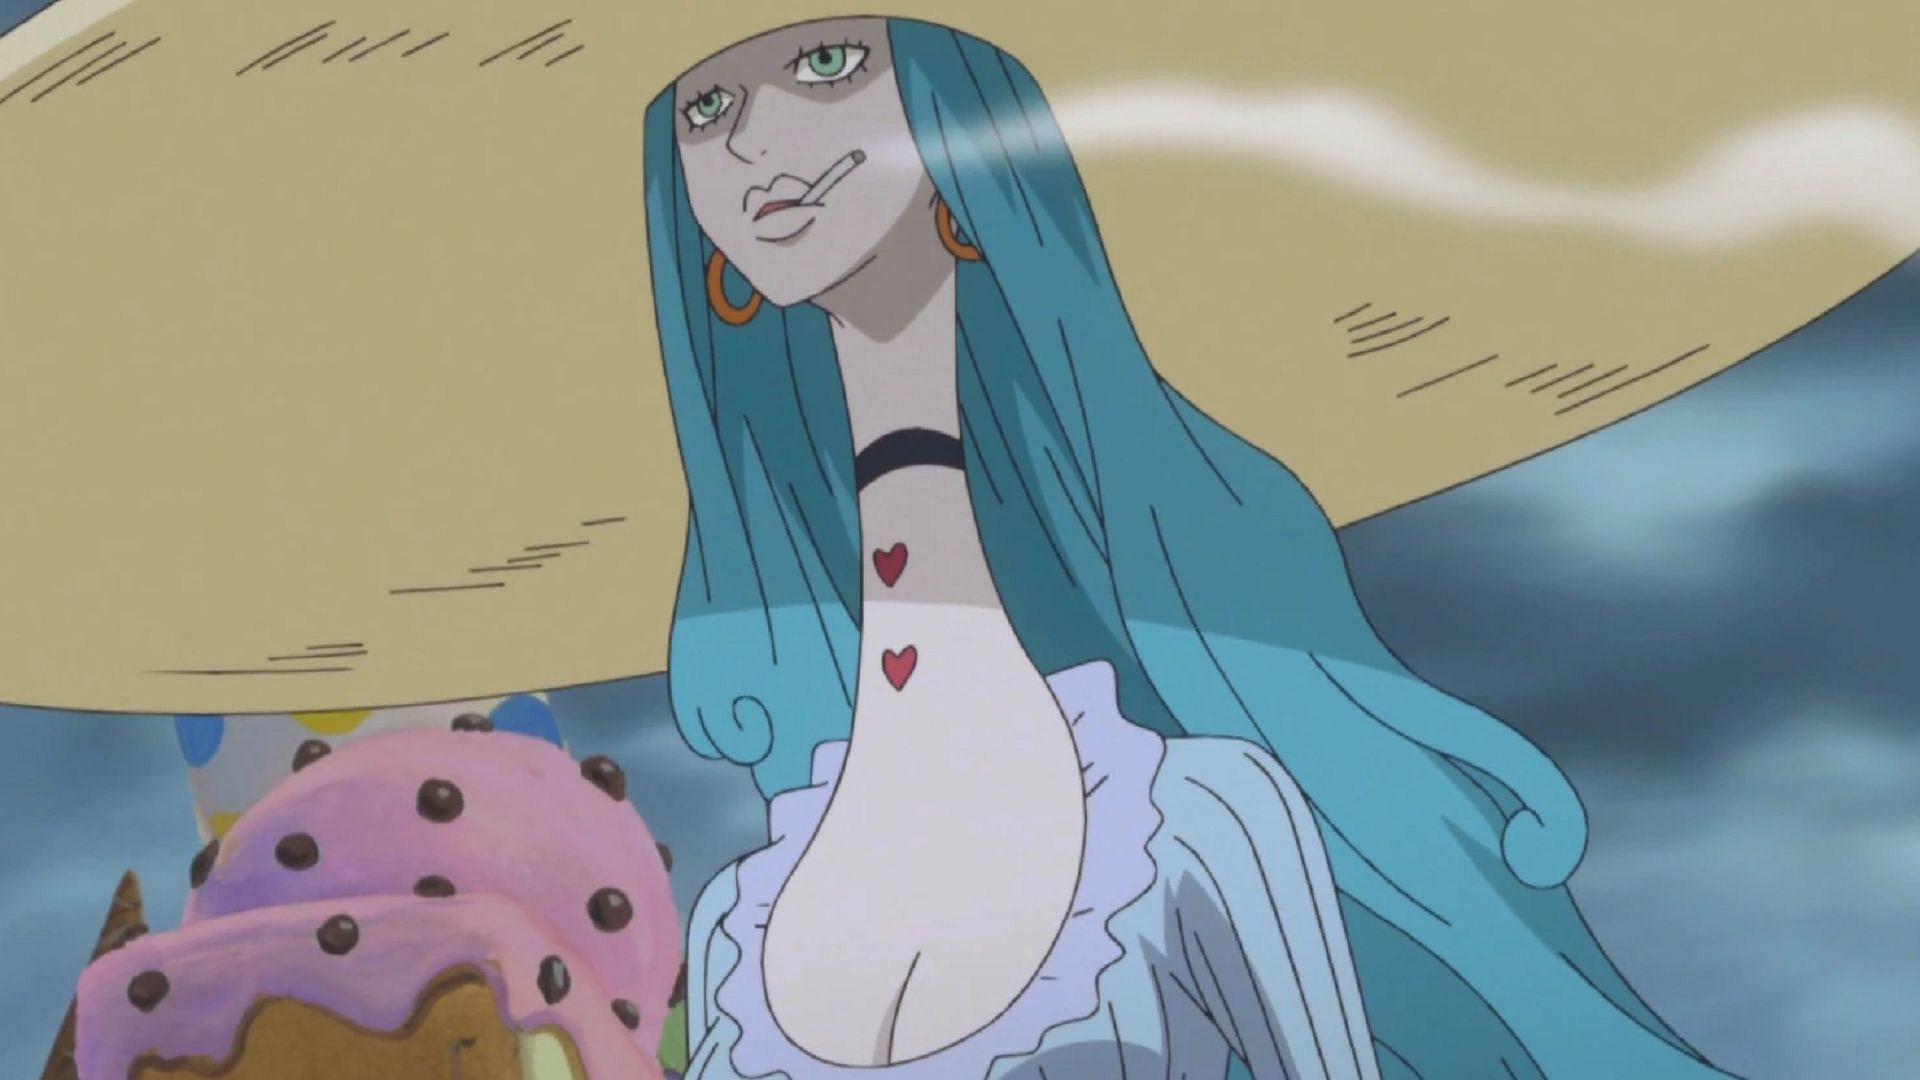 The Snakeneck Charlotte Amande as seen in One Piece (Image via Toei Animation)